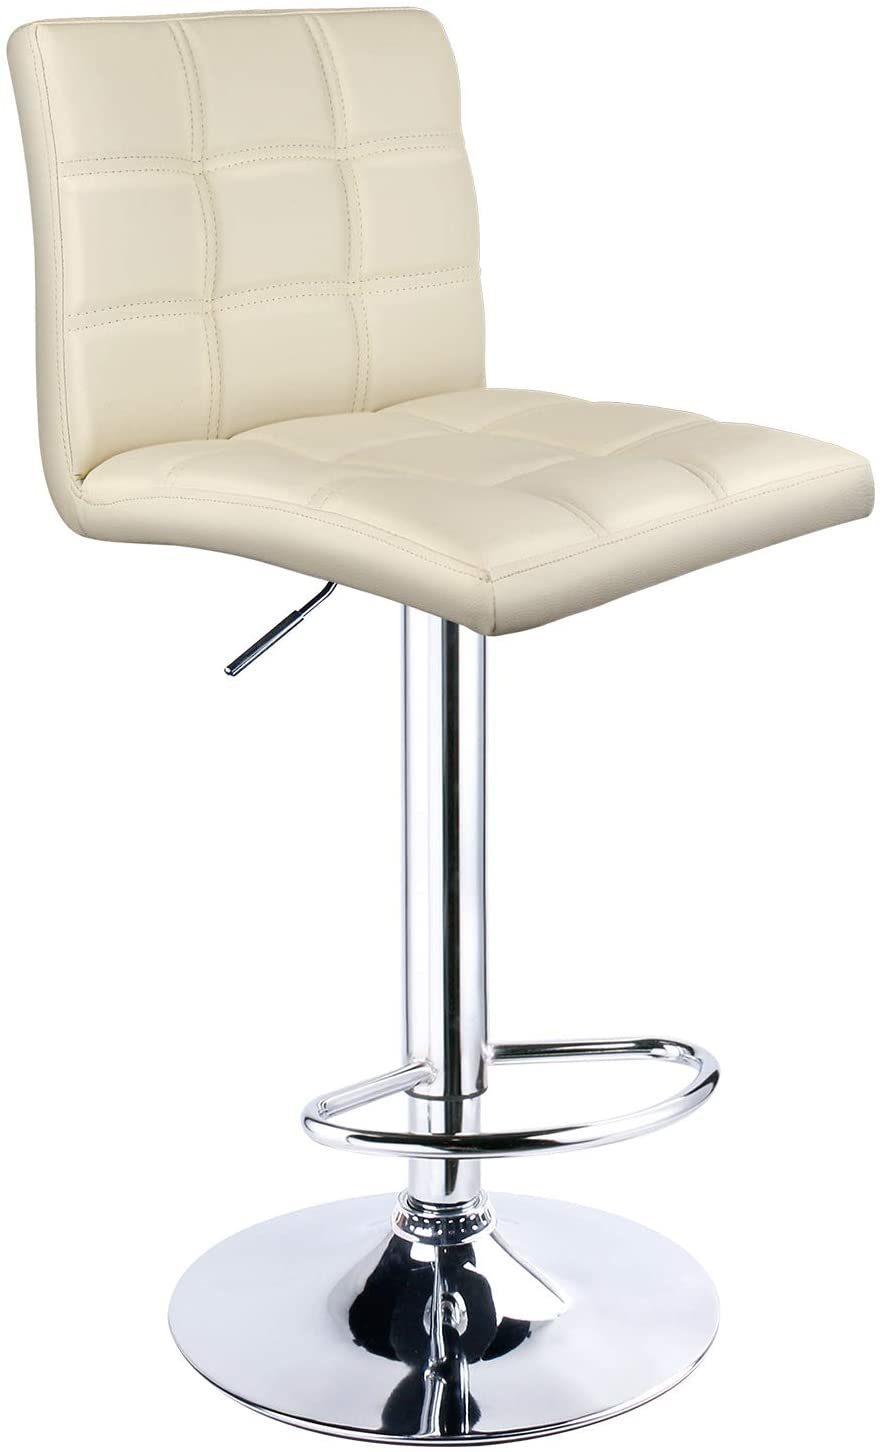 Modern Metal Stainless Steel Green Leather Bar Chair and High Bar Chair Stool for Bar Furniture